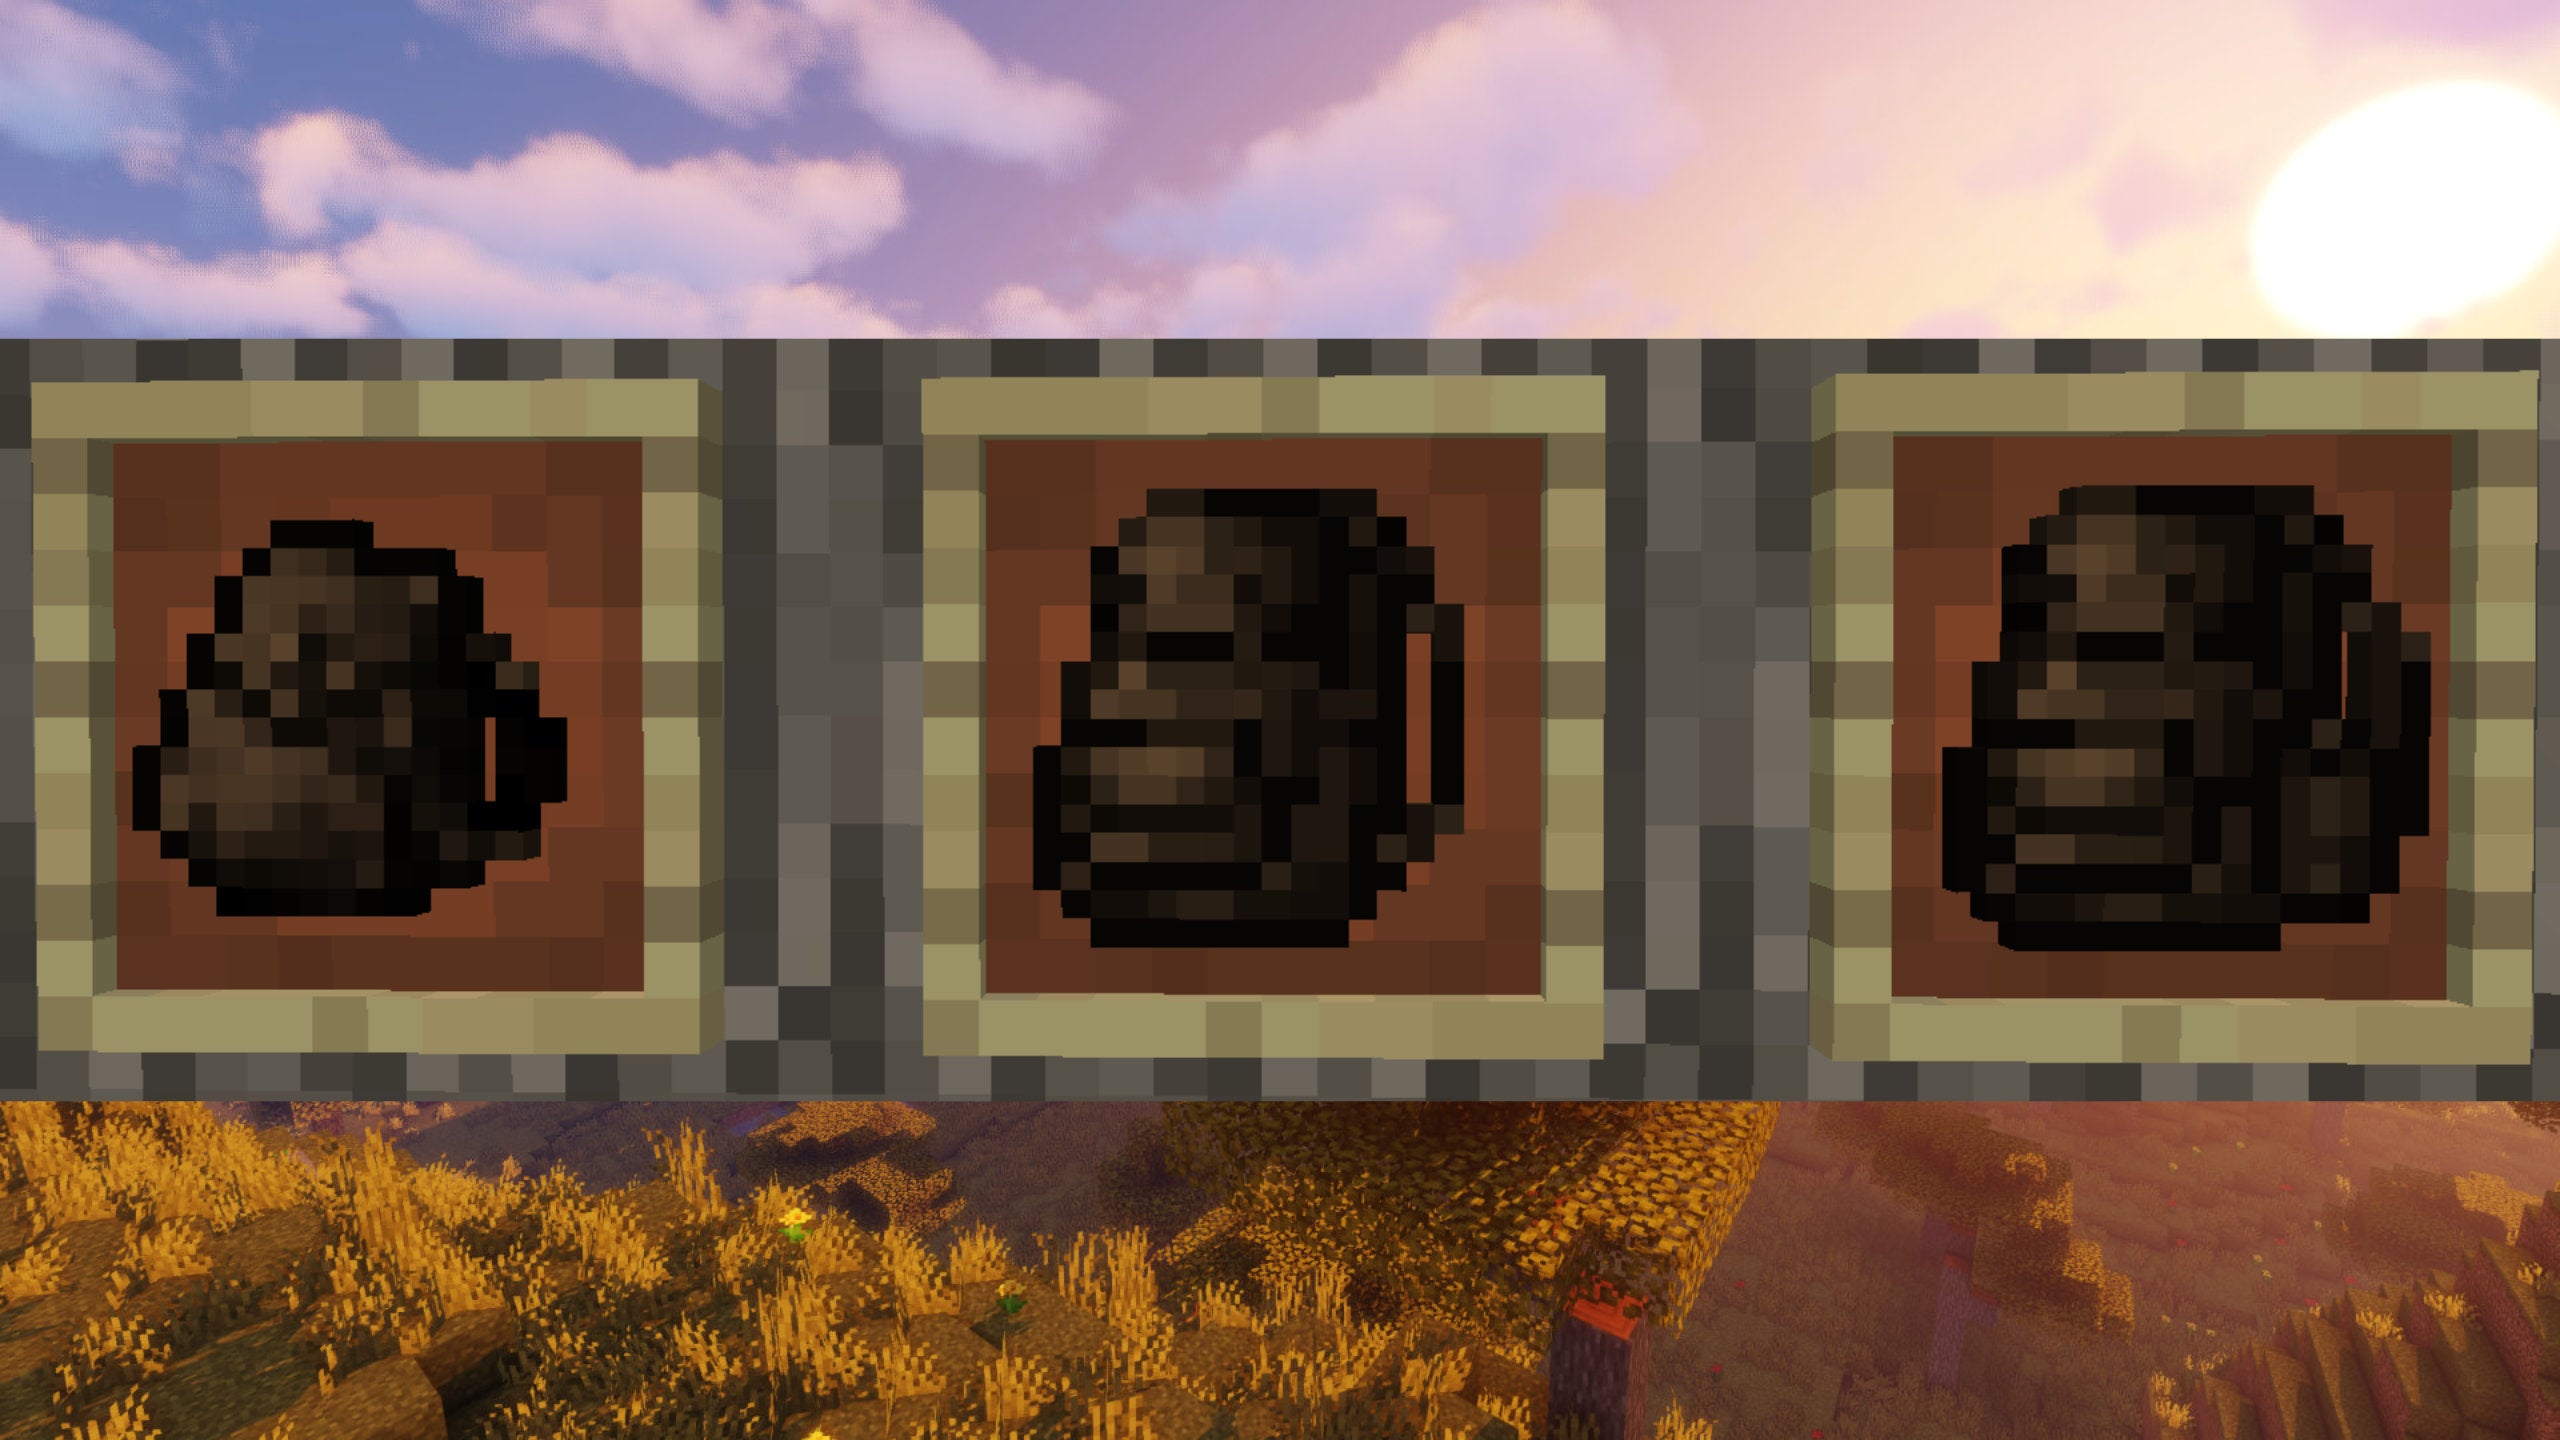 The three types of backpack added to Minecraft with the Useful Backpacks mod, set against a Minecraft landscape backdrop.